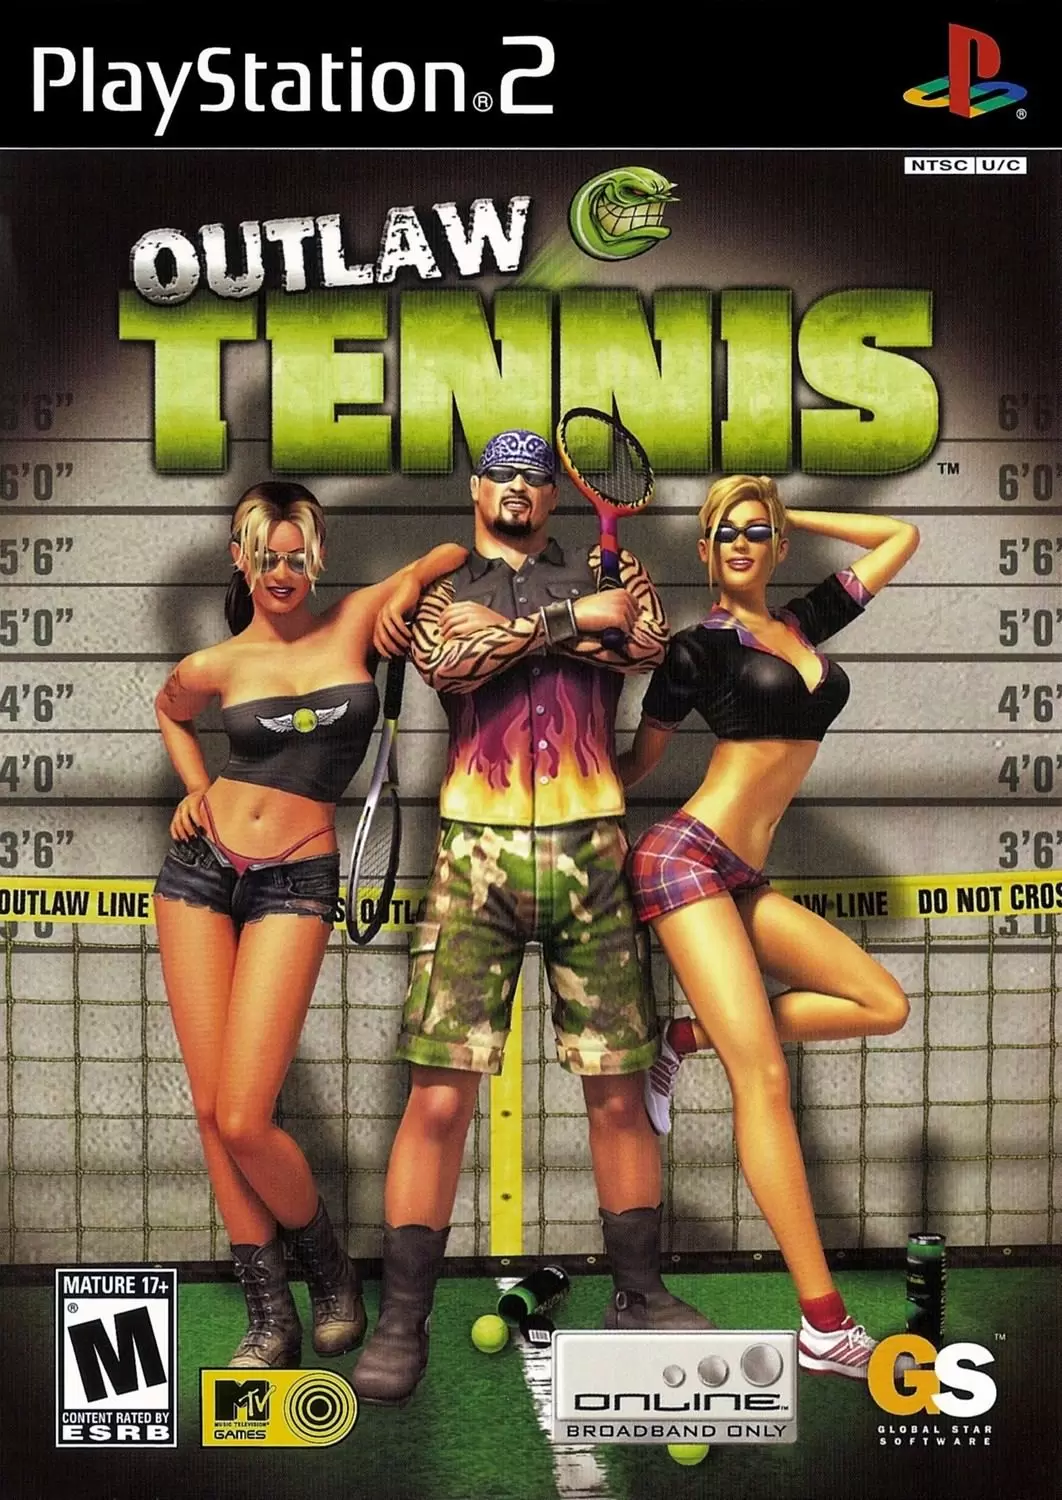 PS2 Games - Outlaw Tennis